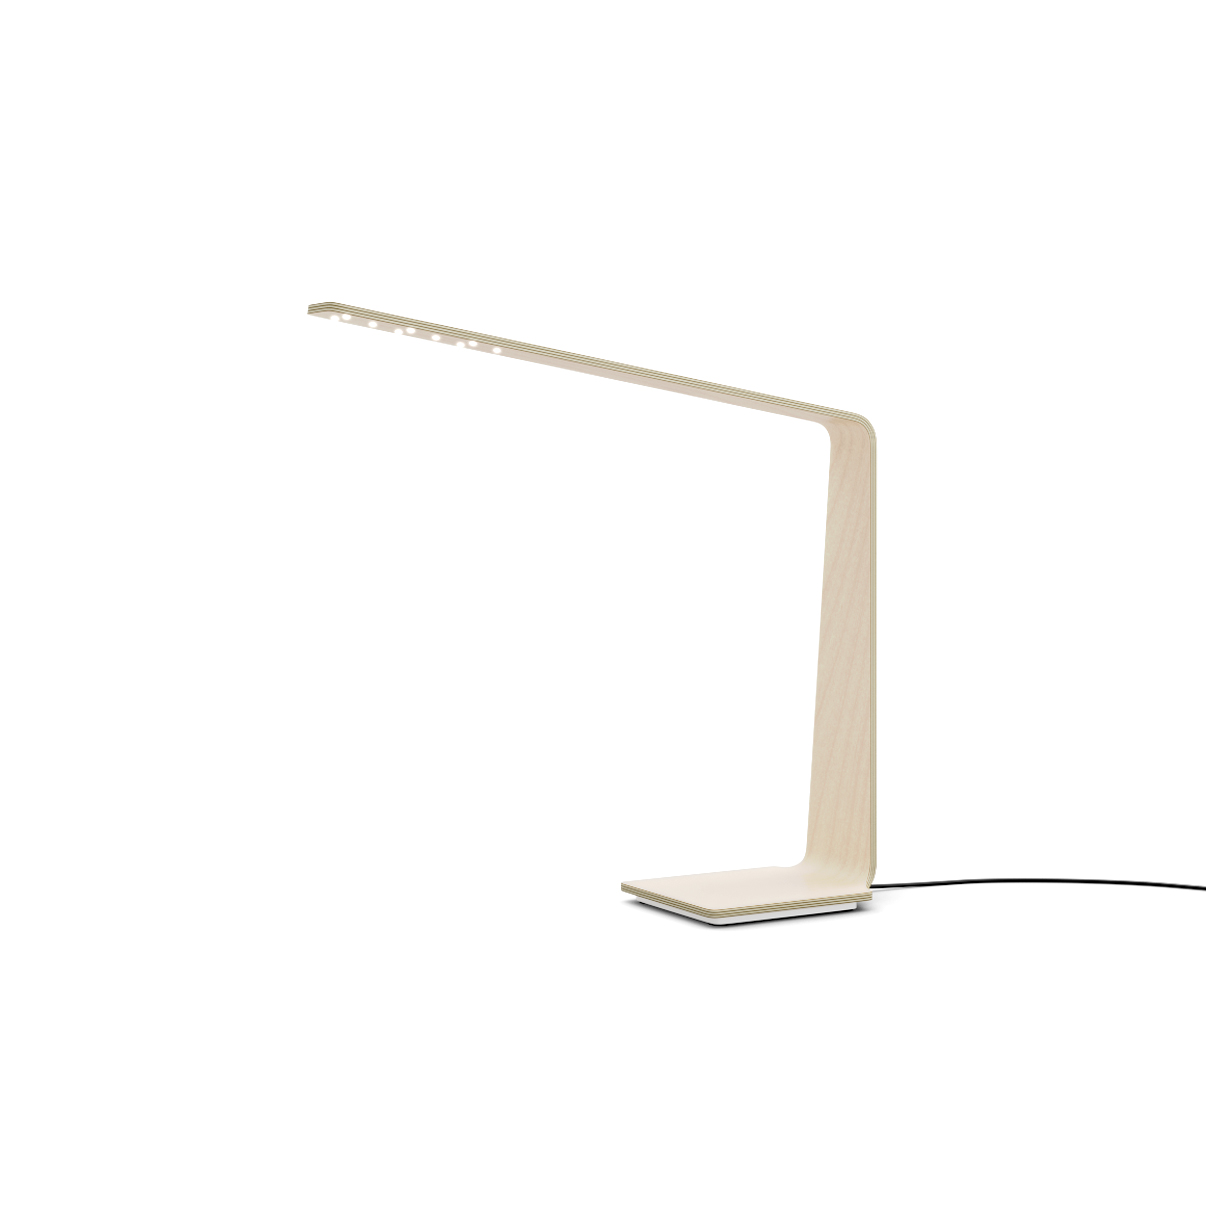 Woodlin by Tunto – 21 5/8″ x 20 1/2″ Portable, Table offers quality European interior lighting design | Zaneen Design